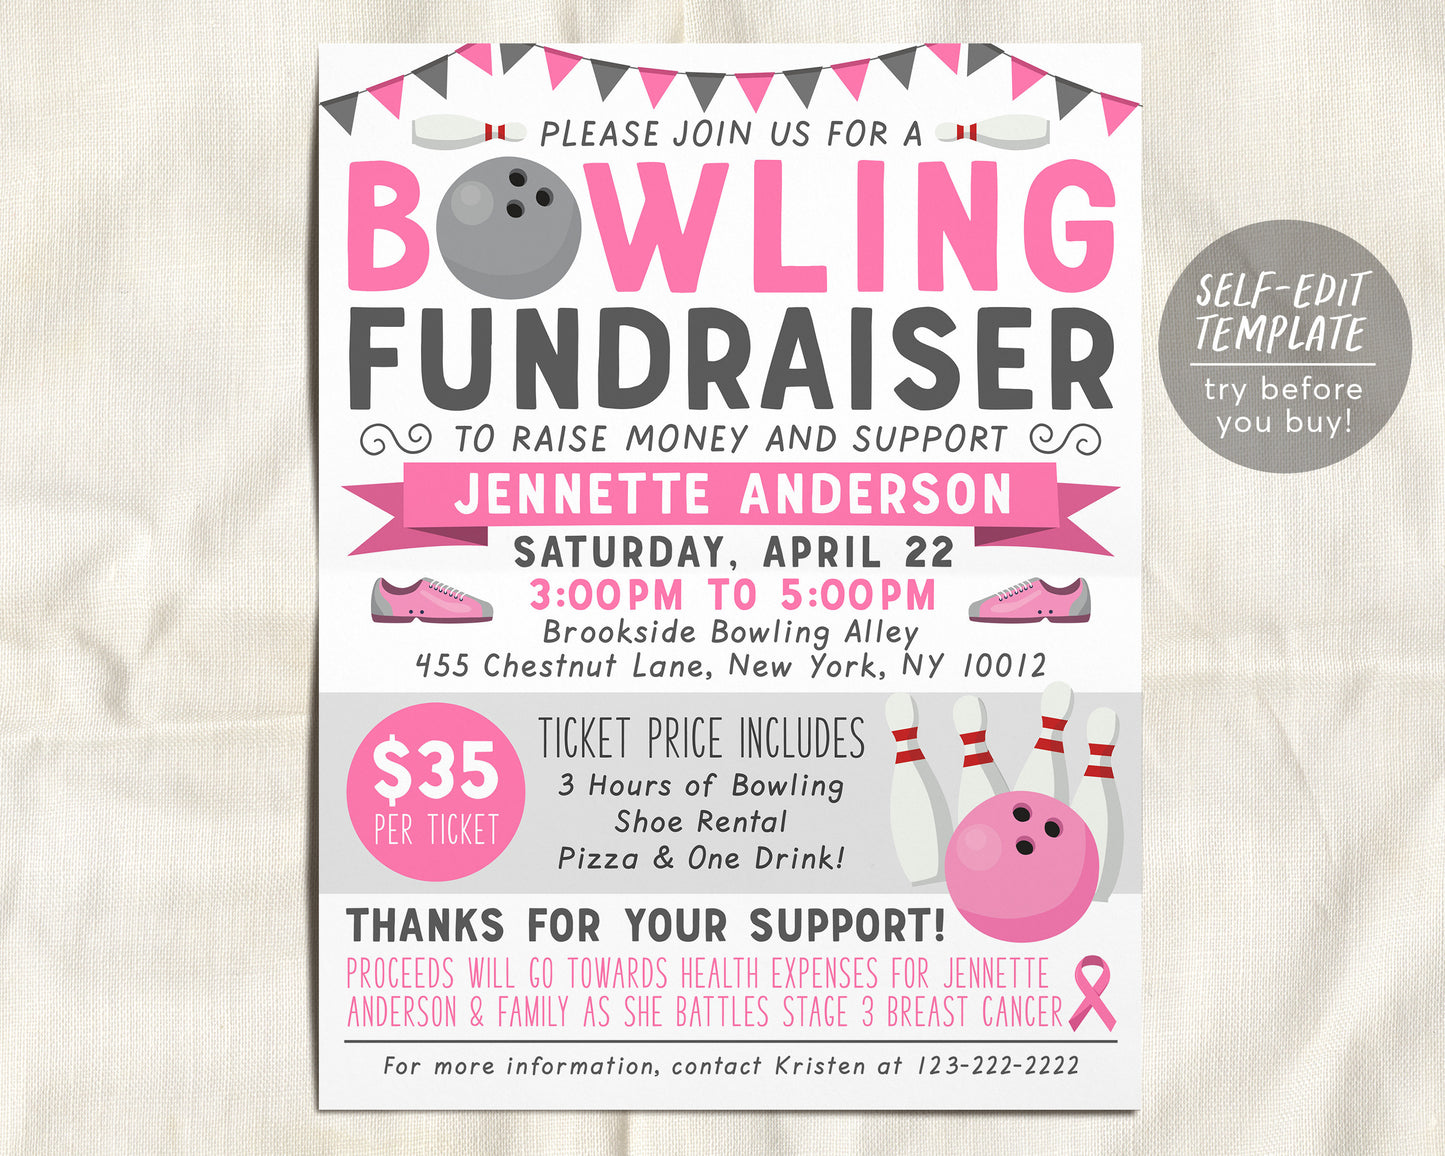 Cancer Bowling Fundraiser Flyer Editable Template, Breast Cancer Medical Fundraising Benefit Event, Bowling Night Invite, Nonprofit Charity